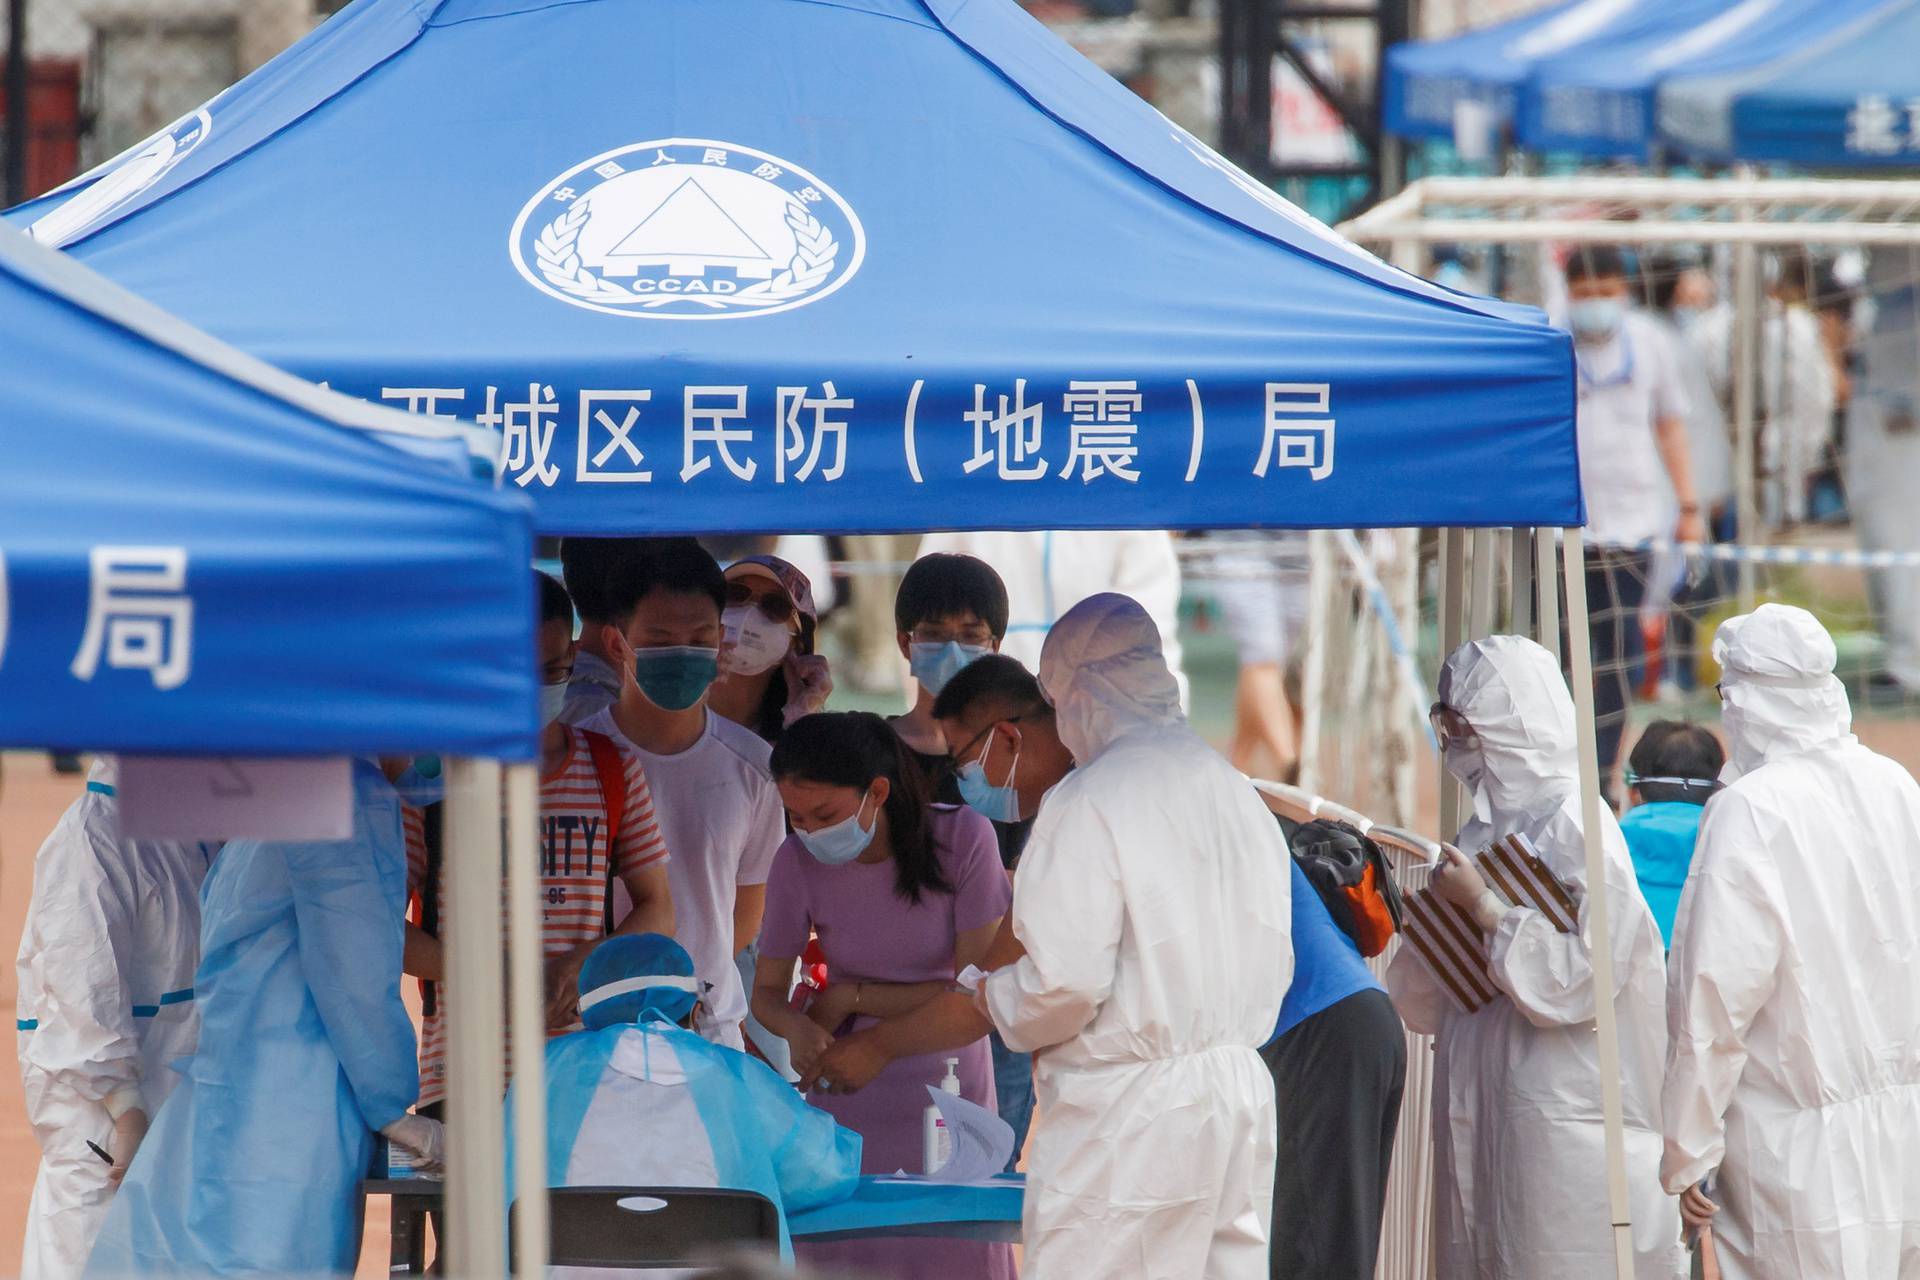 FILE PHOTO: People line up to get tested at the Guangan Sport Center after an unexpected spike of cases of the coronavirus disease (COVID-19) in Beijing